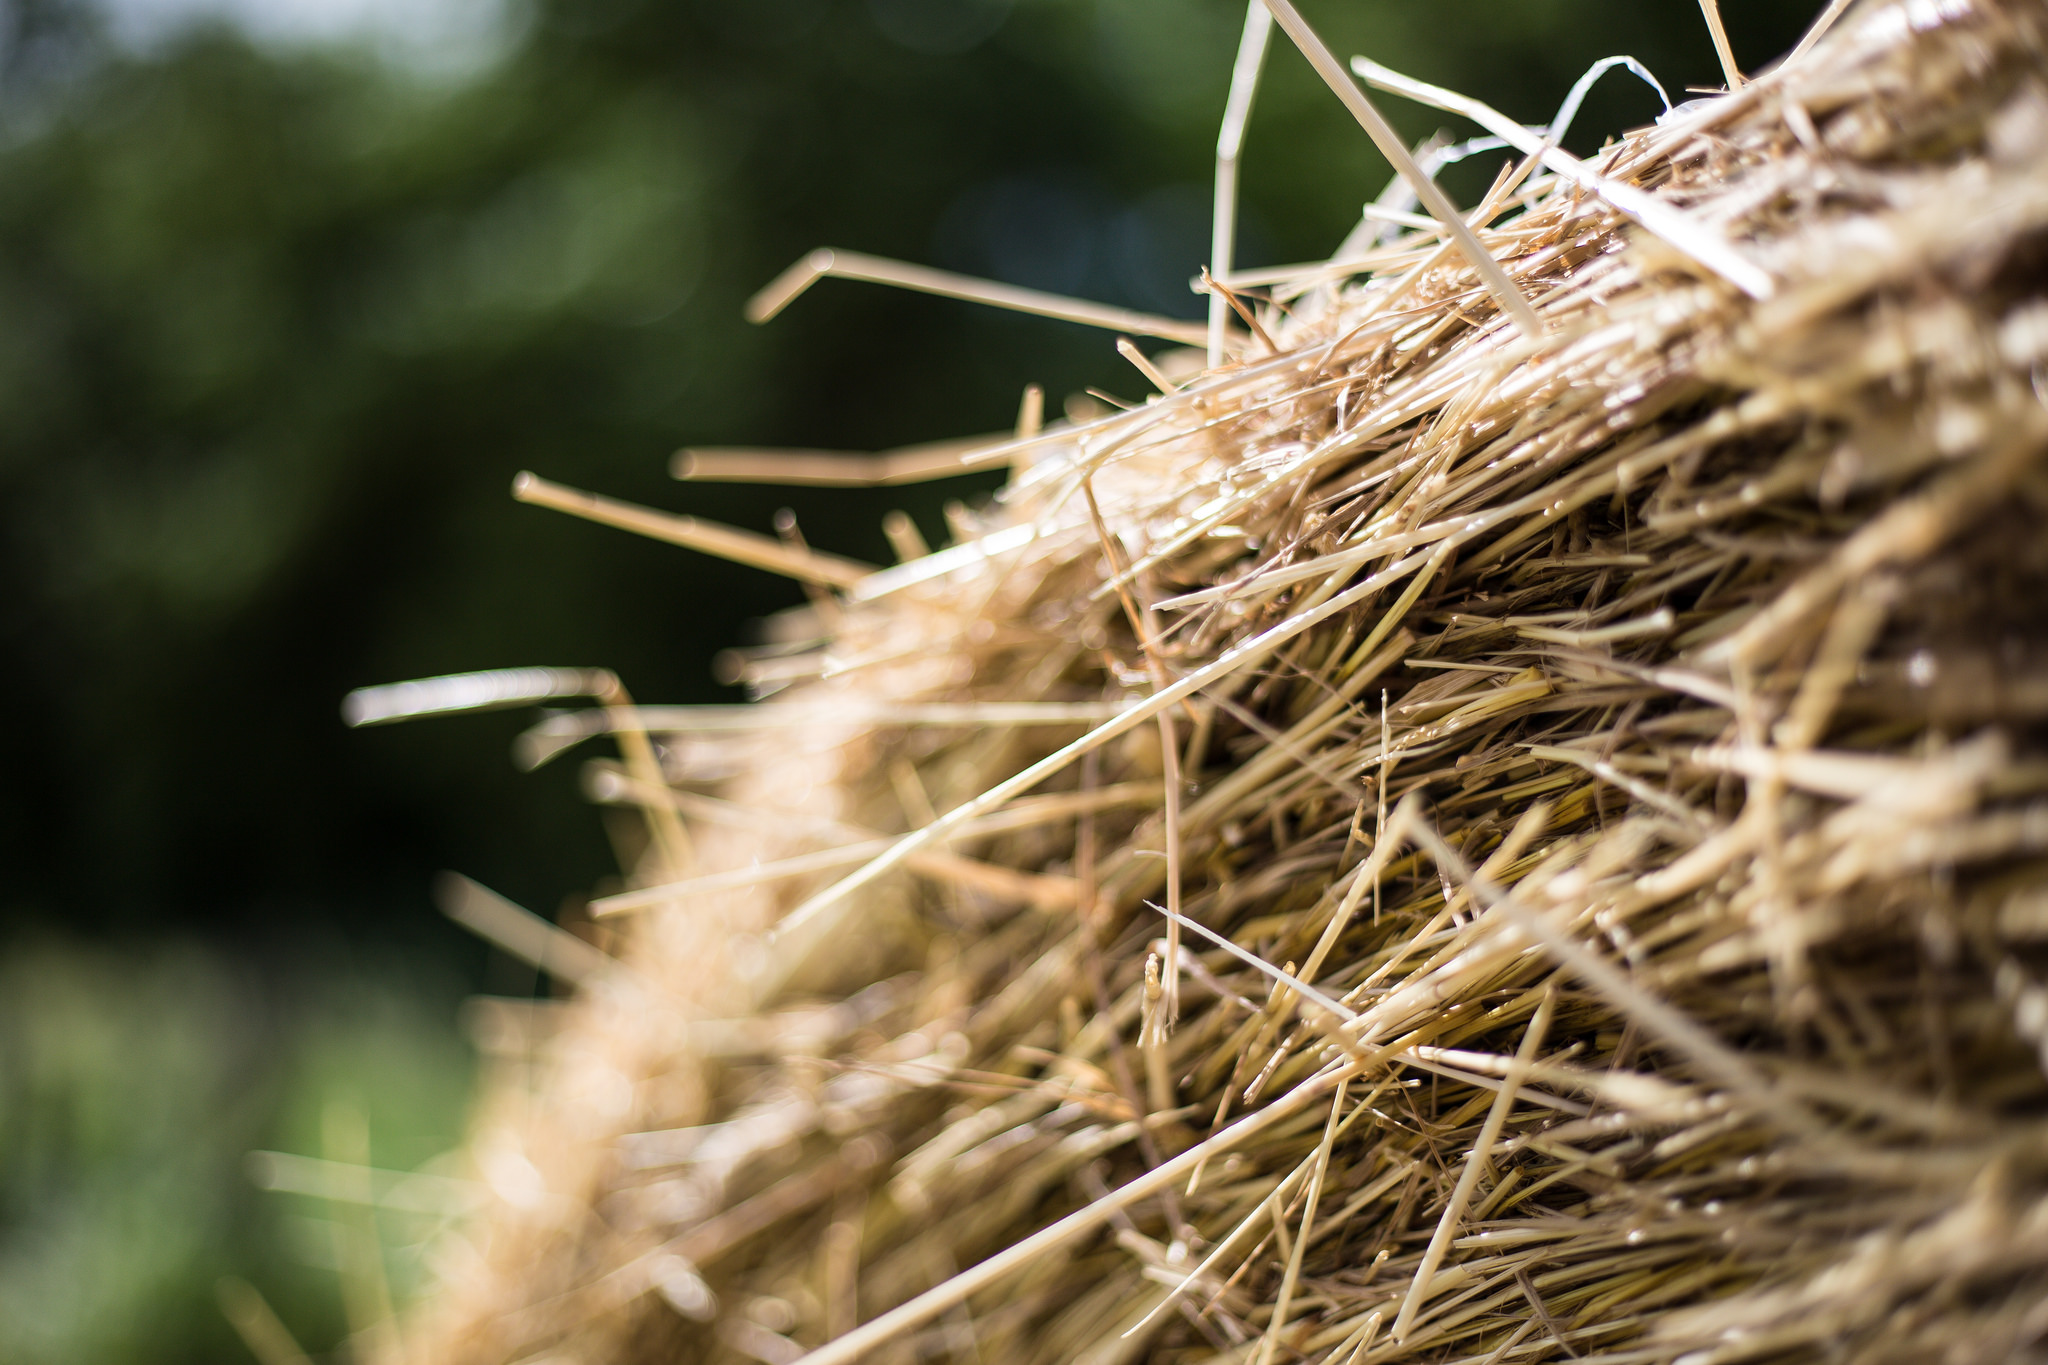 Bale of hay. (Photo: Phil Roeder/Flickr)